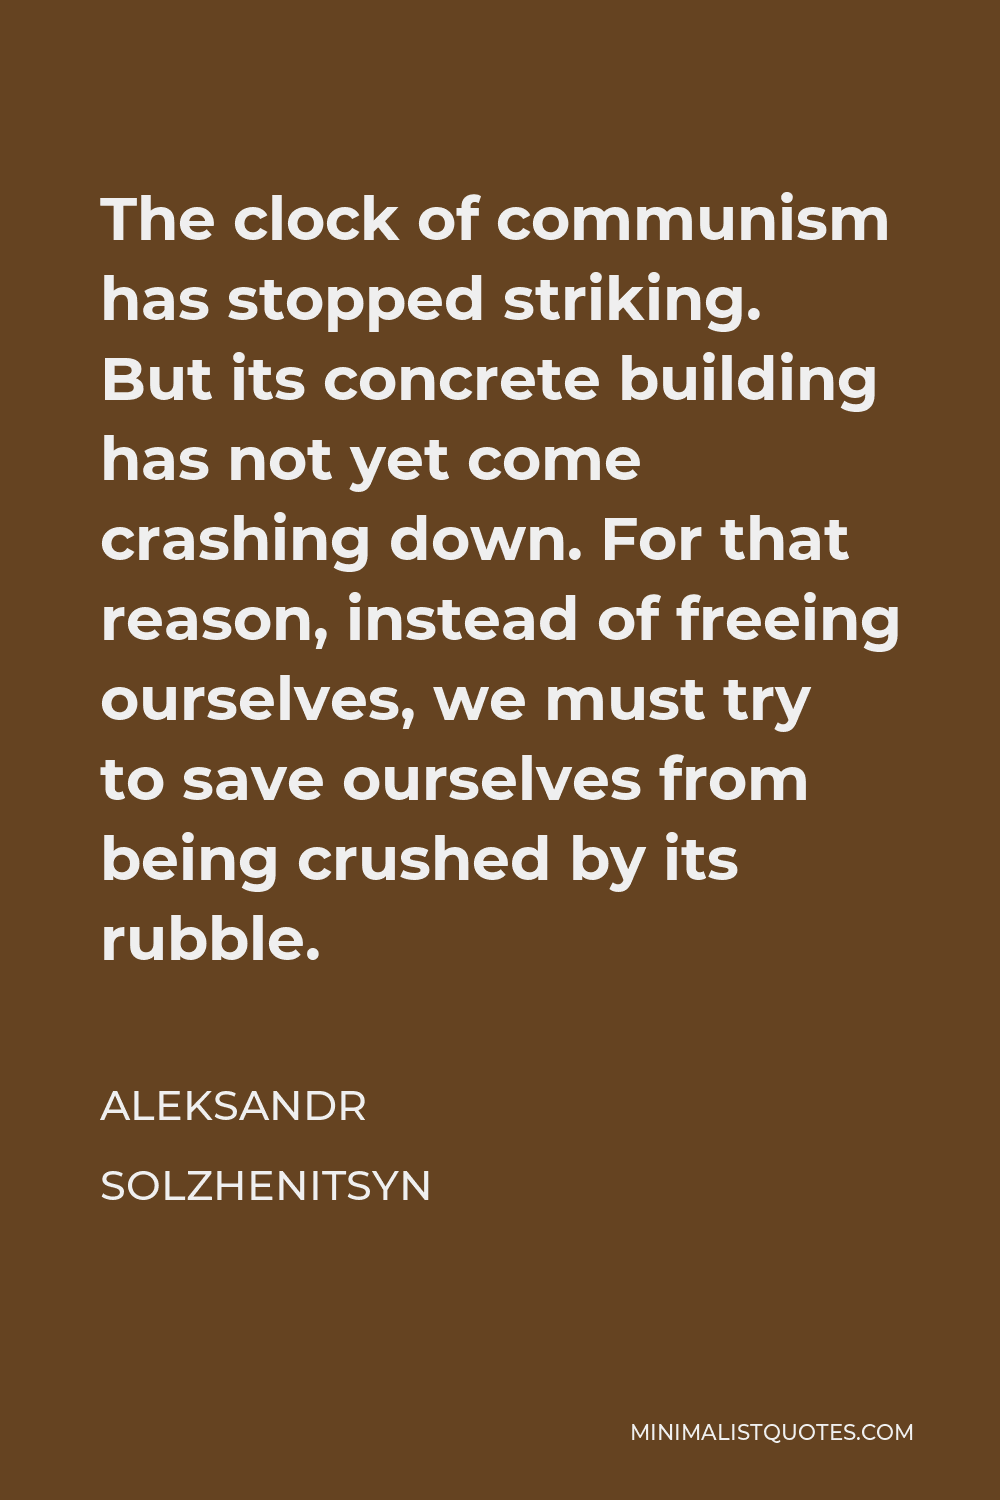 Aleksandr Solzhenitsyn Quote - The clock of communism has stopped striking. But its concrete building has not yet come crashing down. For that reason, instead of freeing ourselves, we must try to save ourselves from being crushed by its rubble.